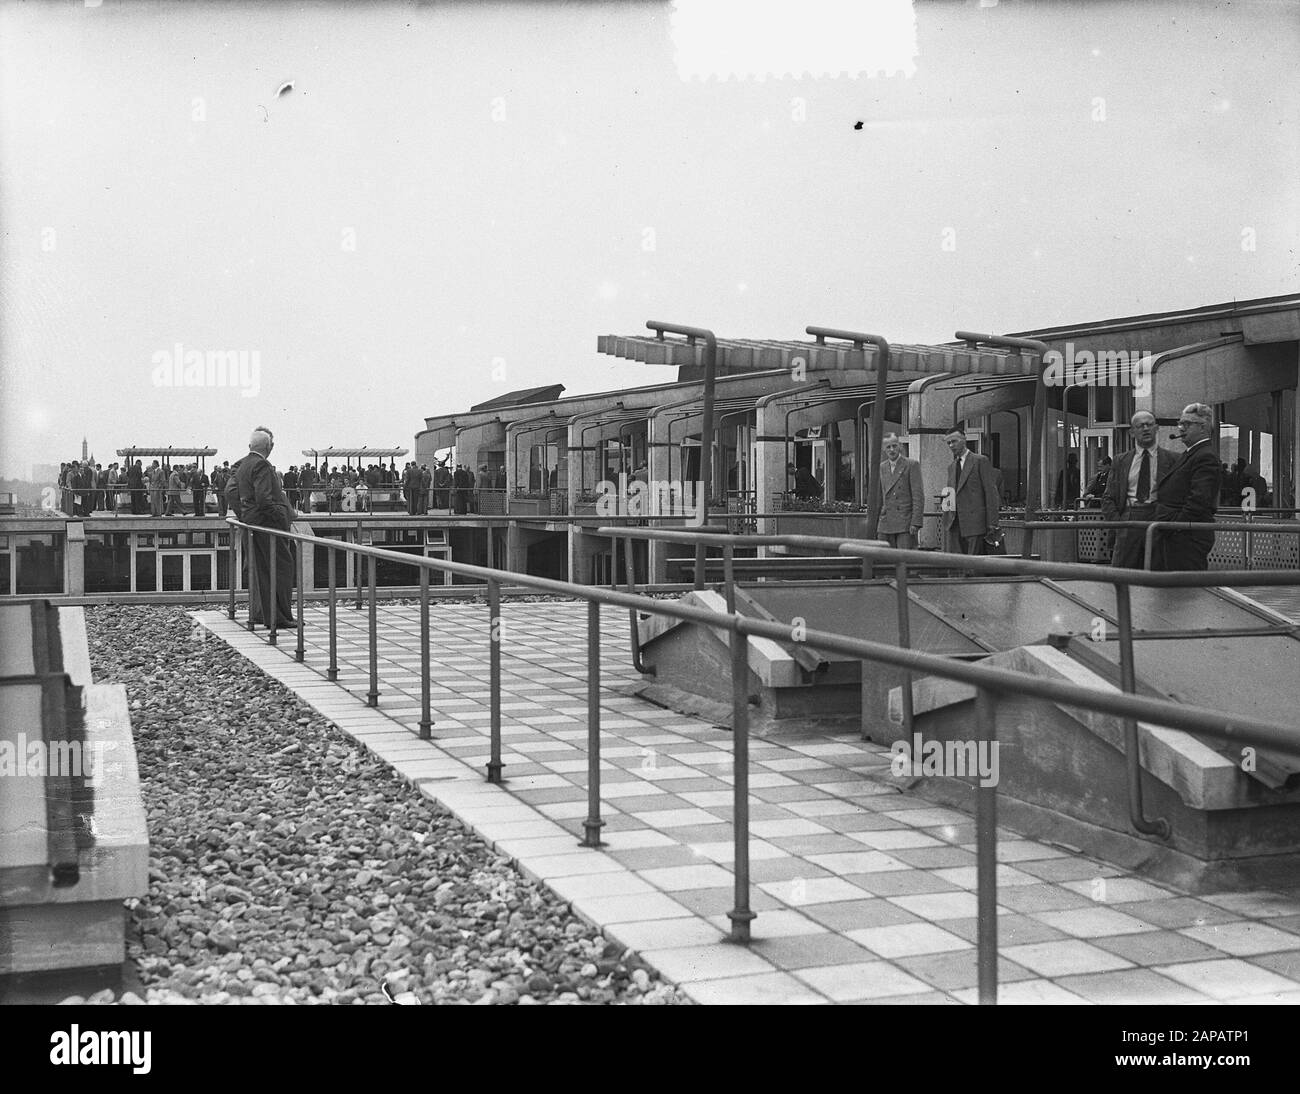 Roof terrace of the Groothandelsgebouw in Rotterdam Annotation: The architects are Huig A. Maaskant and Willem van Tijen Date: 14 June 1953 Location: Rotterdam, Zuid-Holland Keywords: roof terraces, wholesale buildings Stock Photo